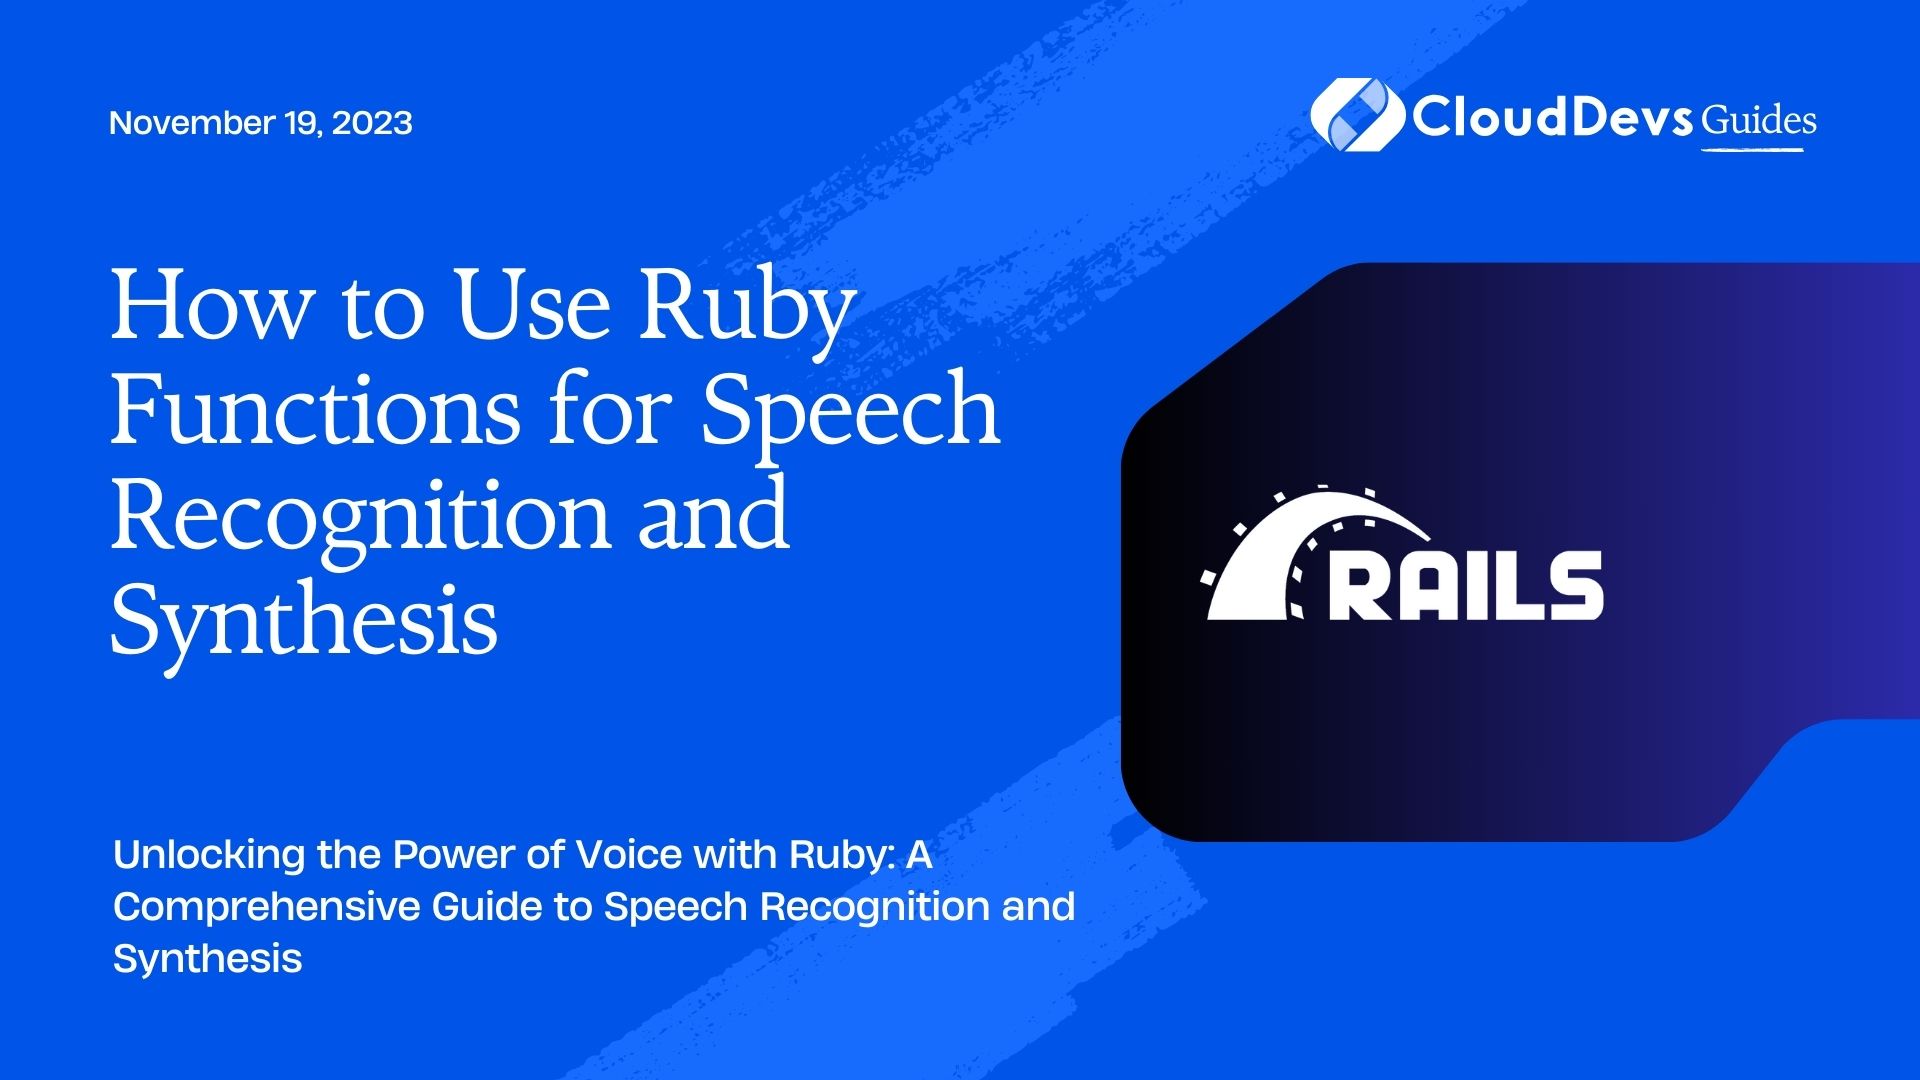 How to Use Ruby Functions for Speech Recognition and Synthesis